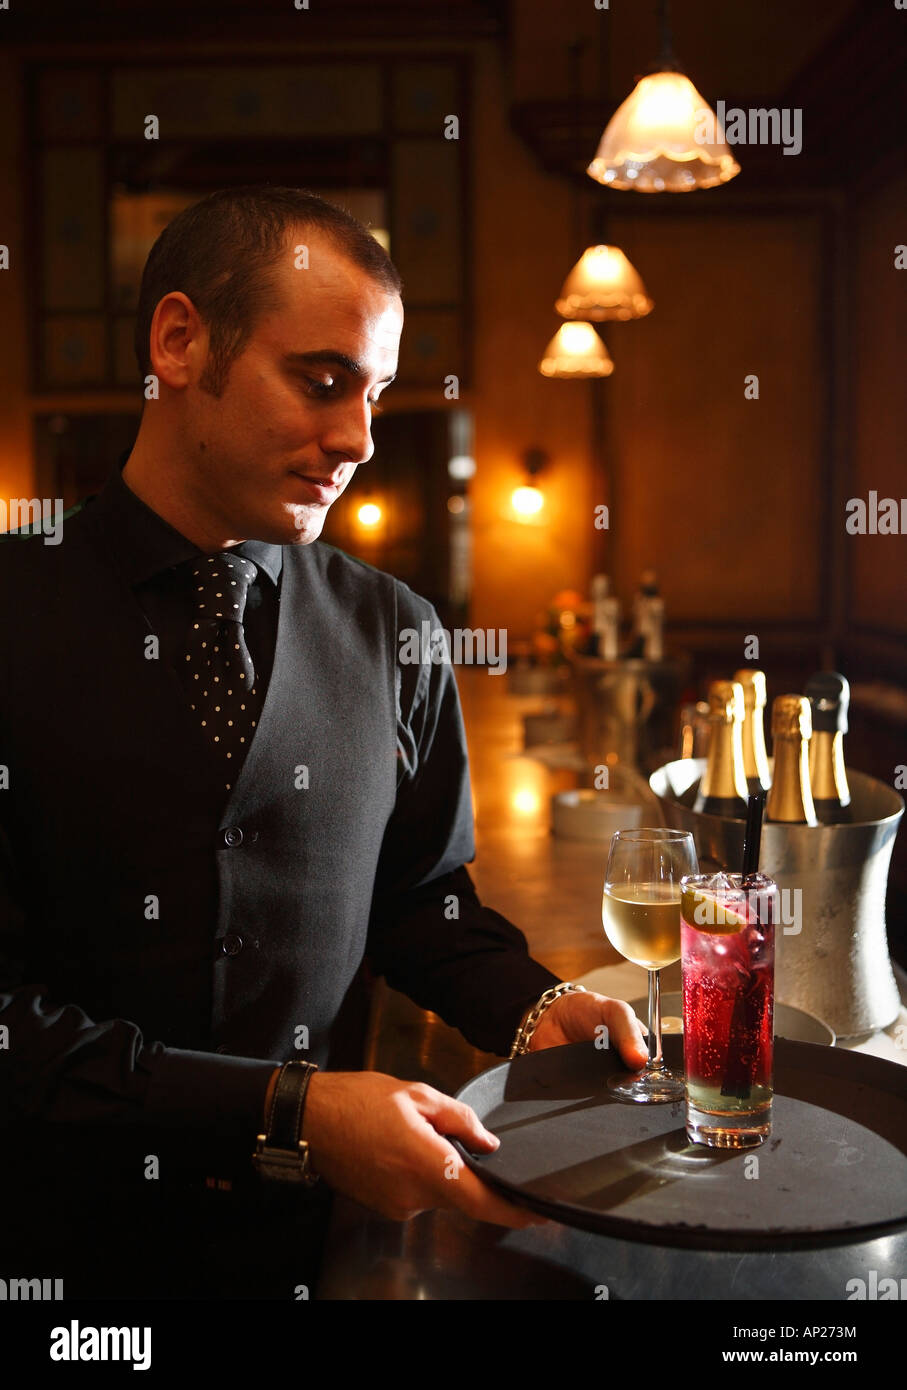 Bar tender carring a tray of drinks from the bar Stock Photo